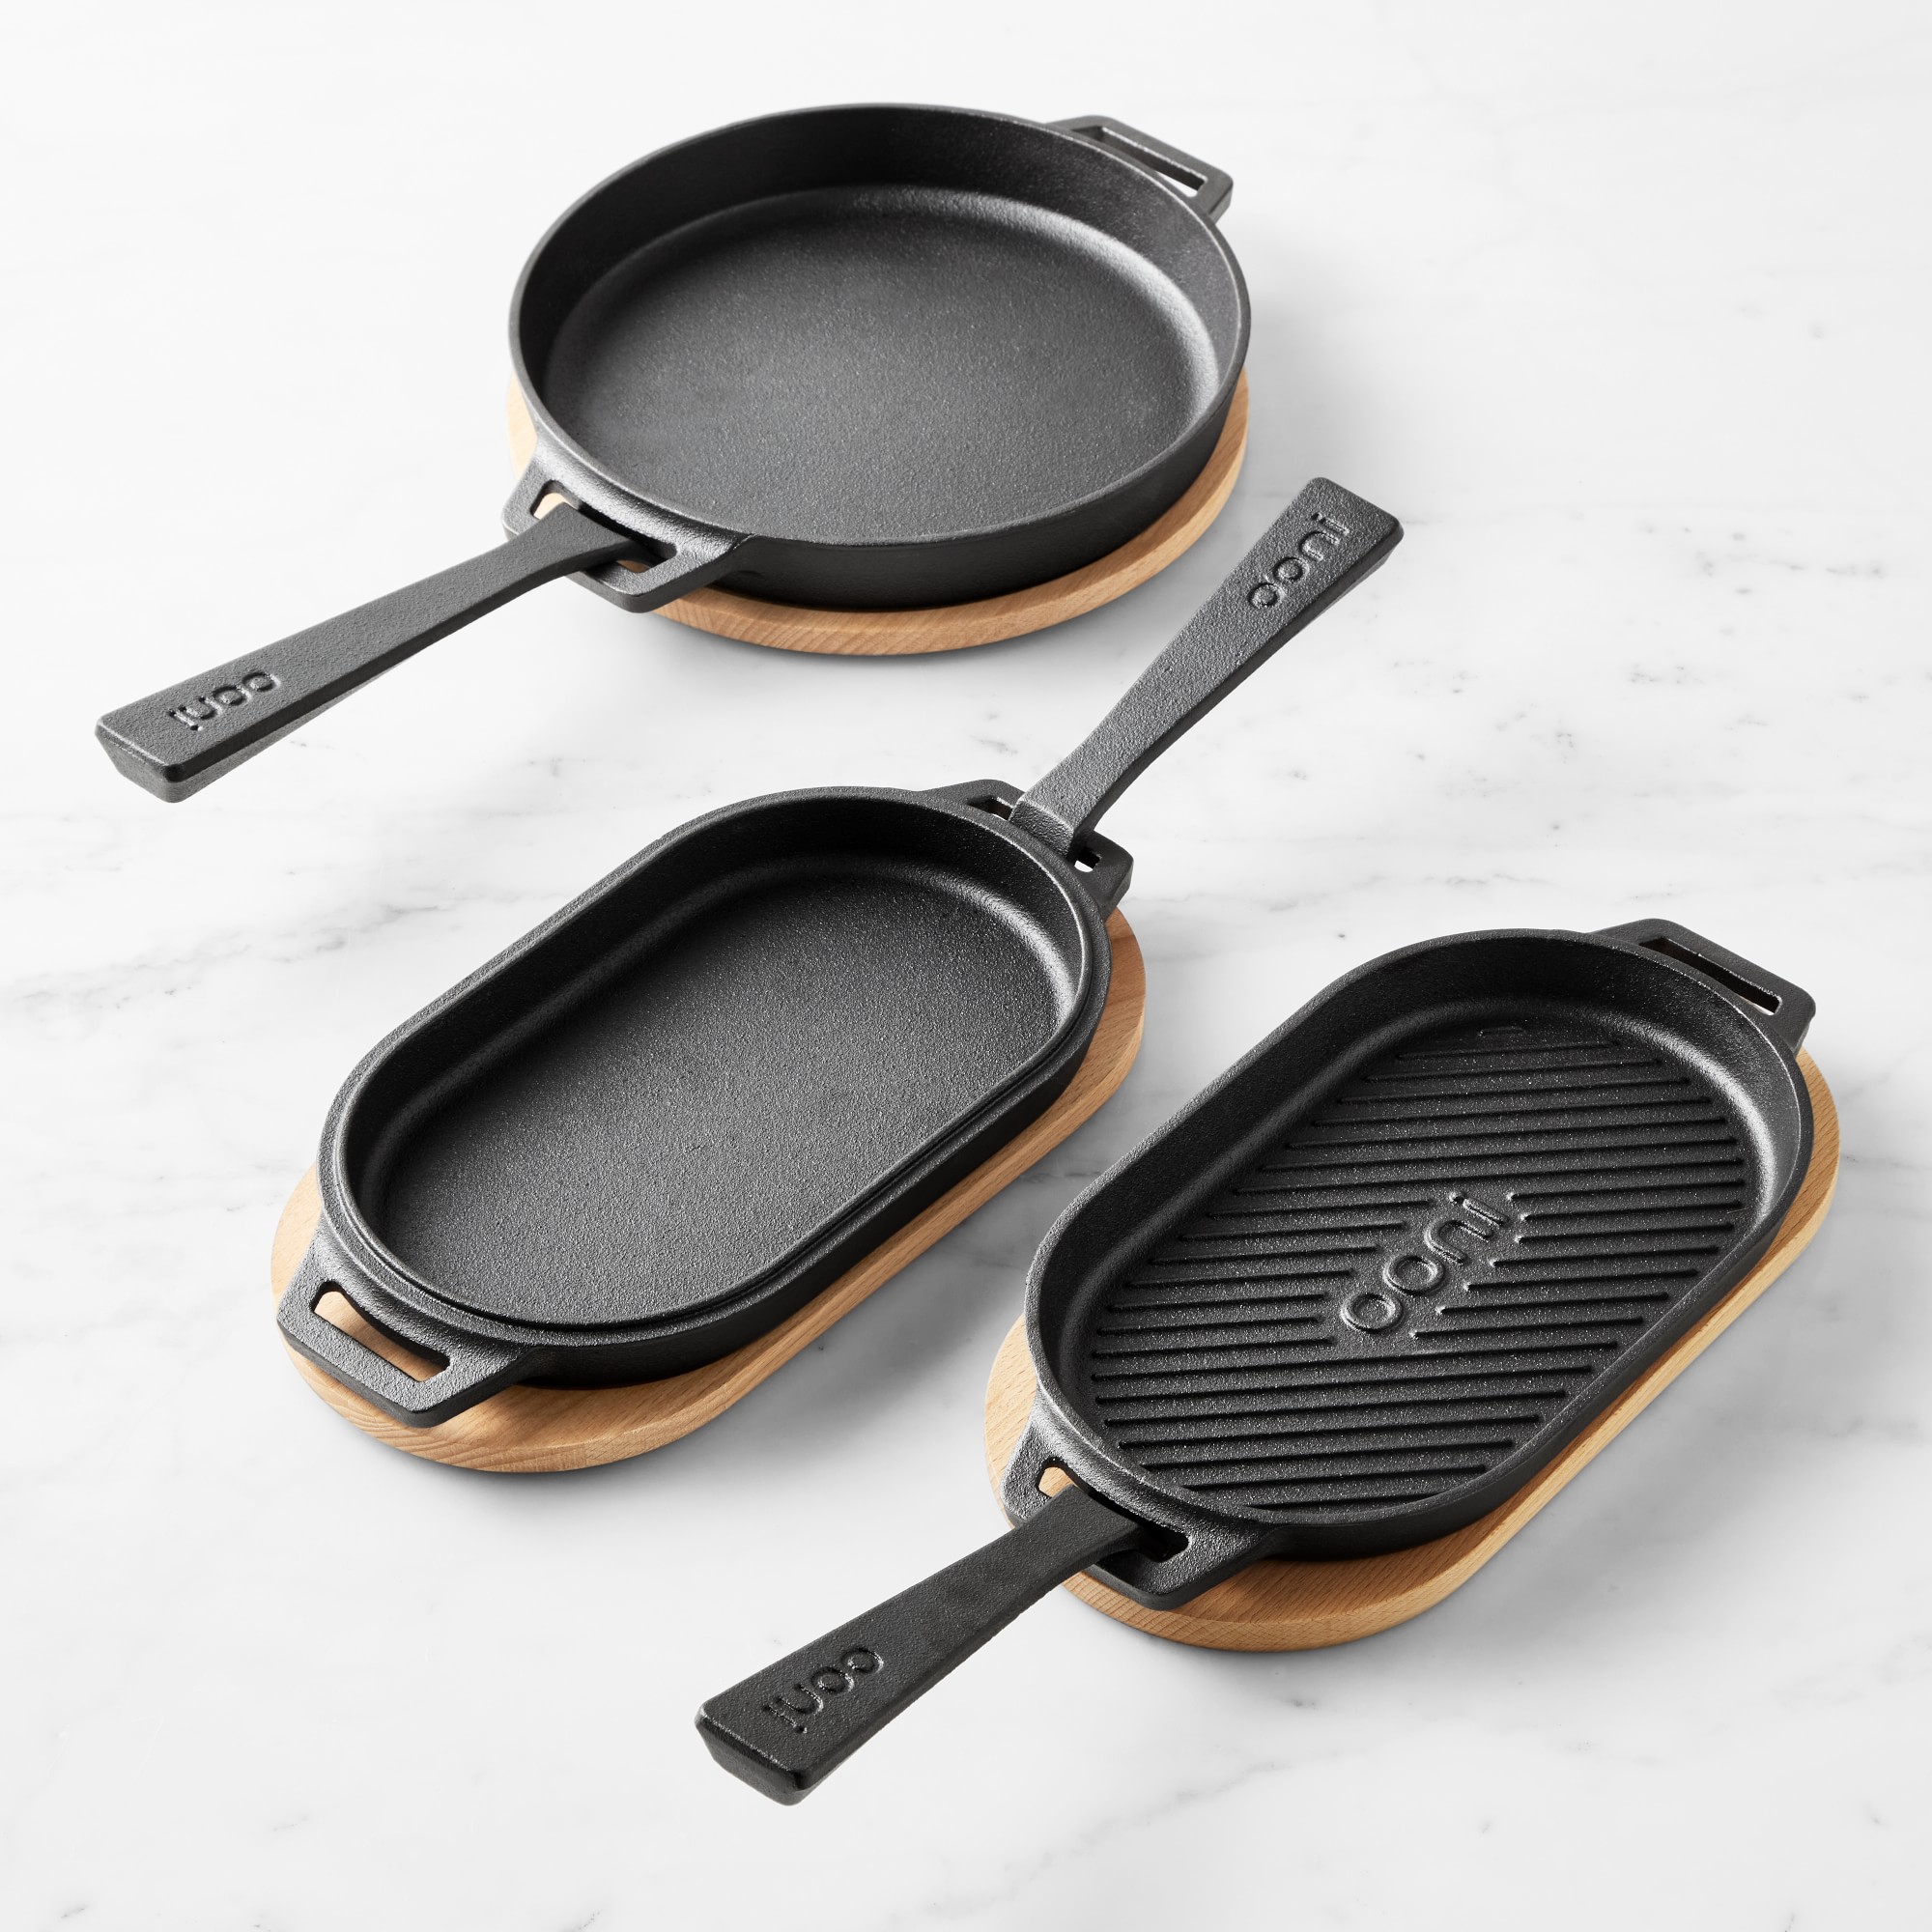 Ooni Cast Iron Skillet, Grizzler & Sizzler Pan Cookware Set